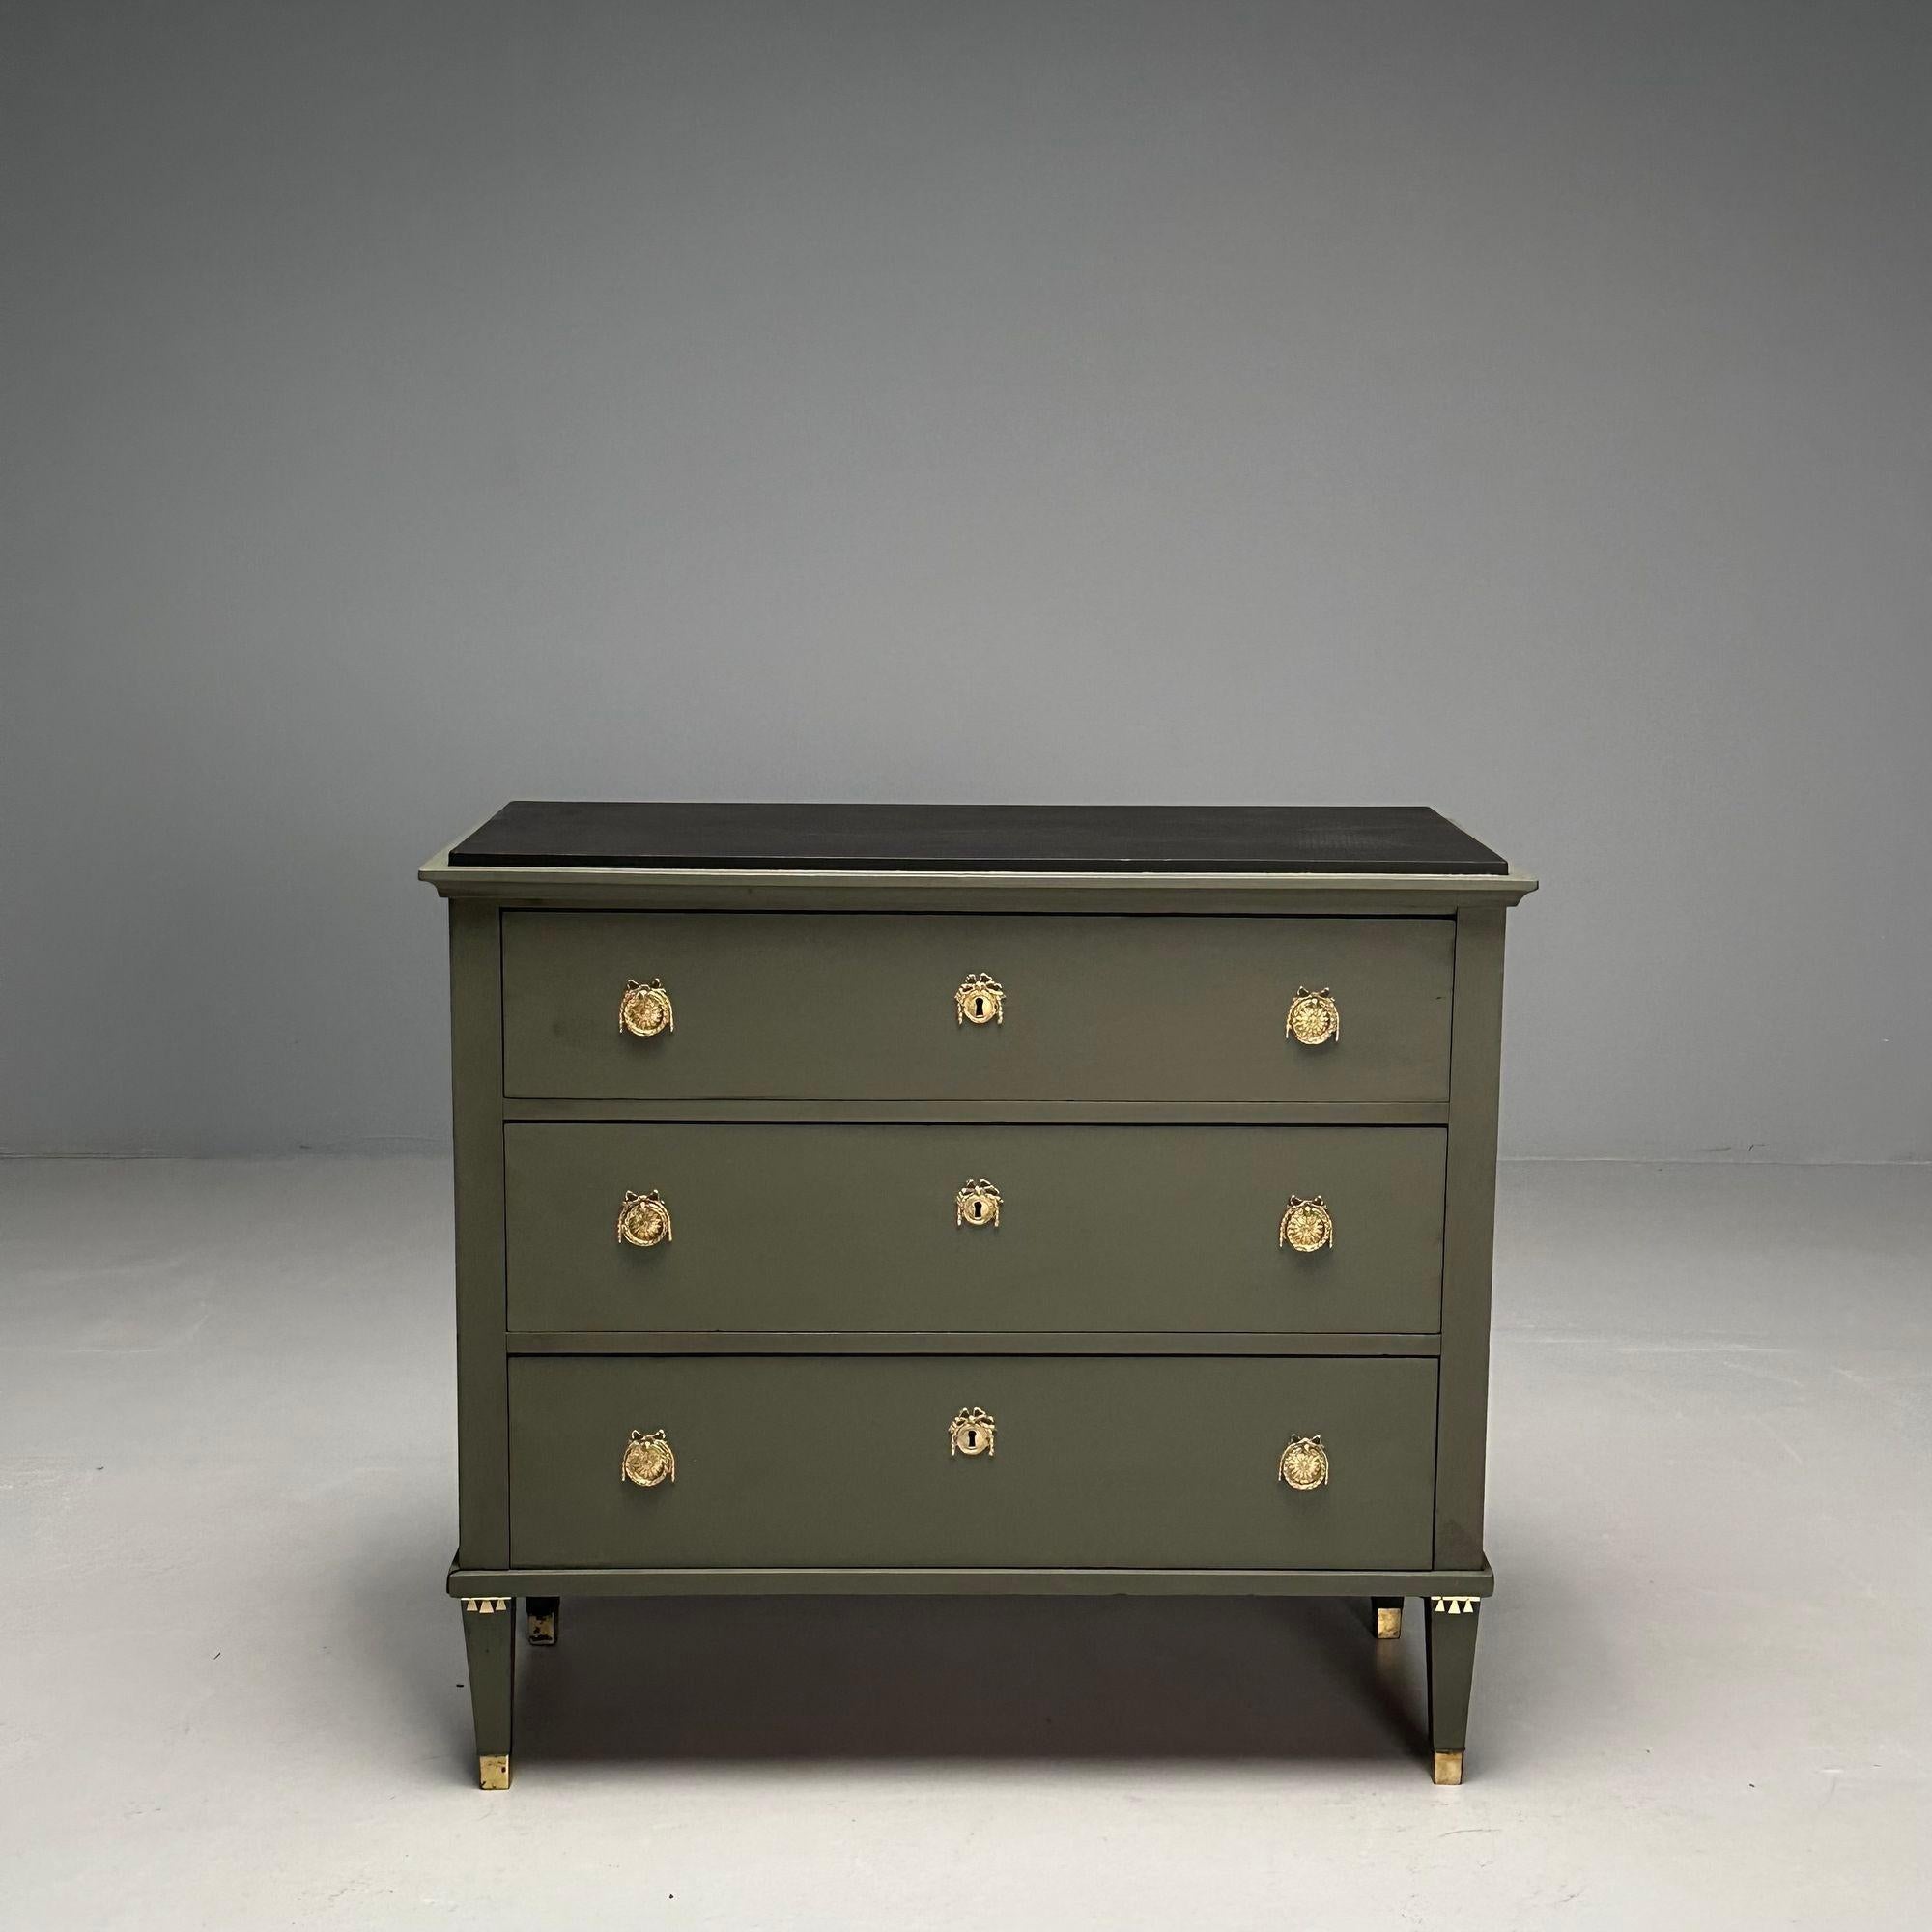 Gustavian, Swedish Commode, Green Paint, Pinewood, Brass, Sweden, 1970s

Gustavian chest of drawers in the Louis XVI style designed and produced in Sweden in the later half of the 20th century. This example having a later green painted finish, three